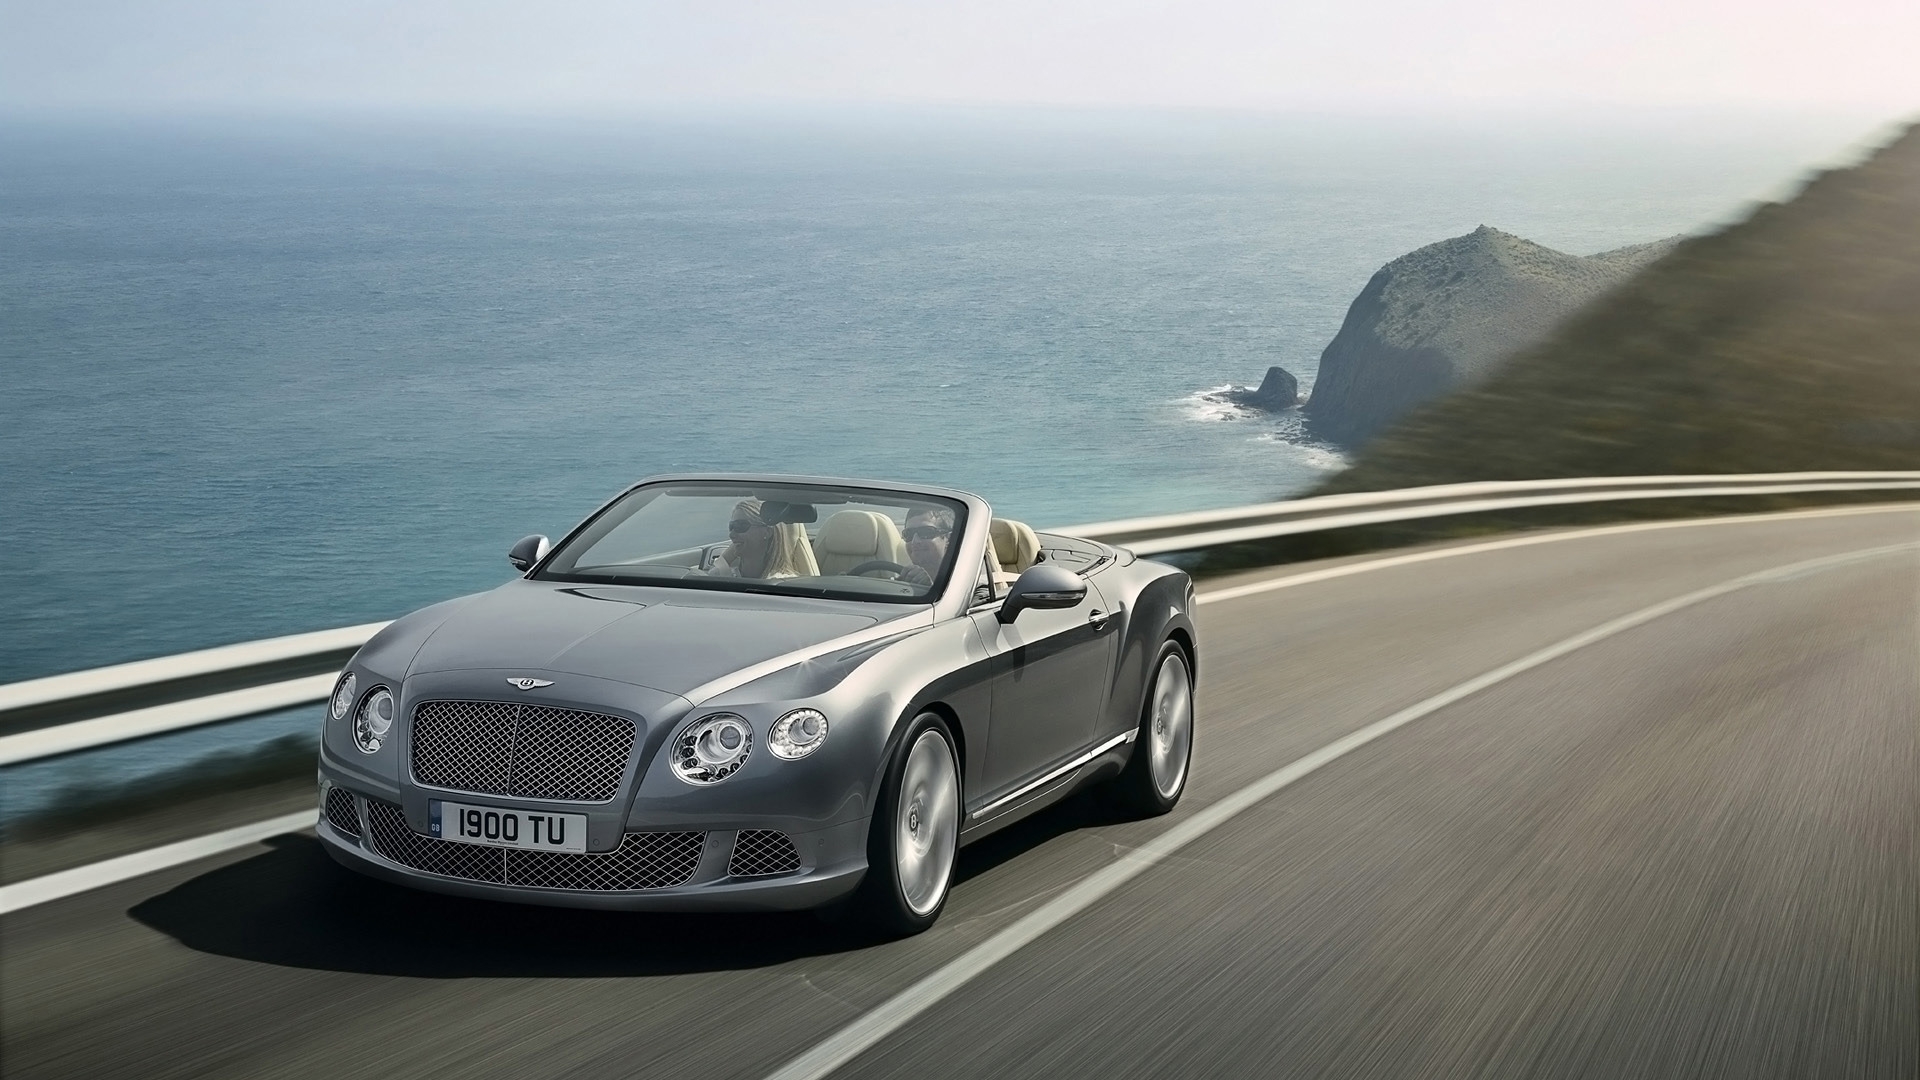 2012 Bentley Continental GTC for 1920 x 1080 HDTV 1080p resolution